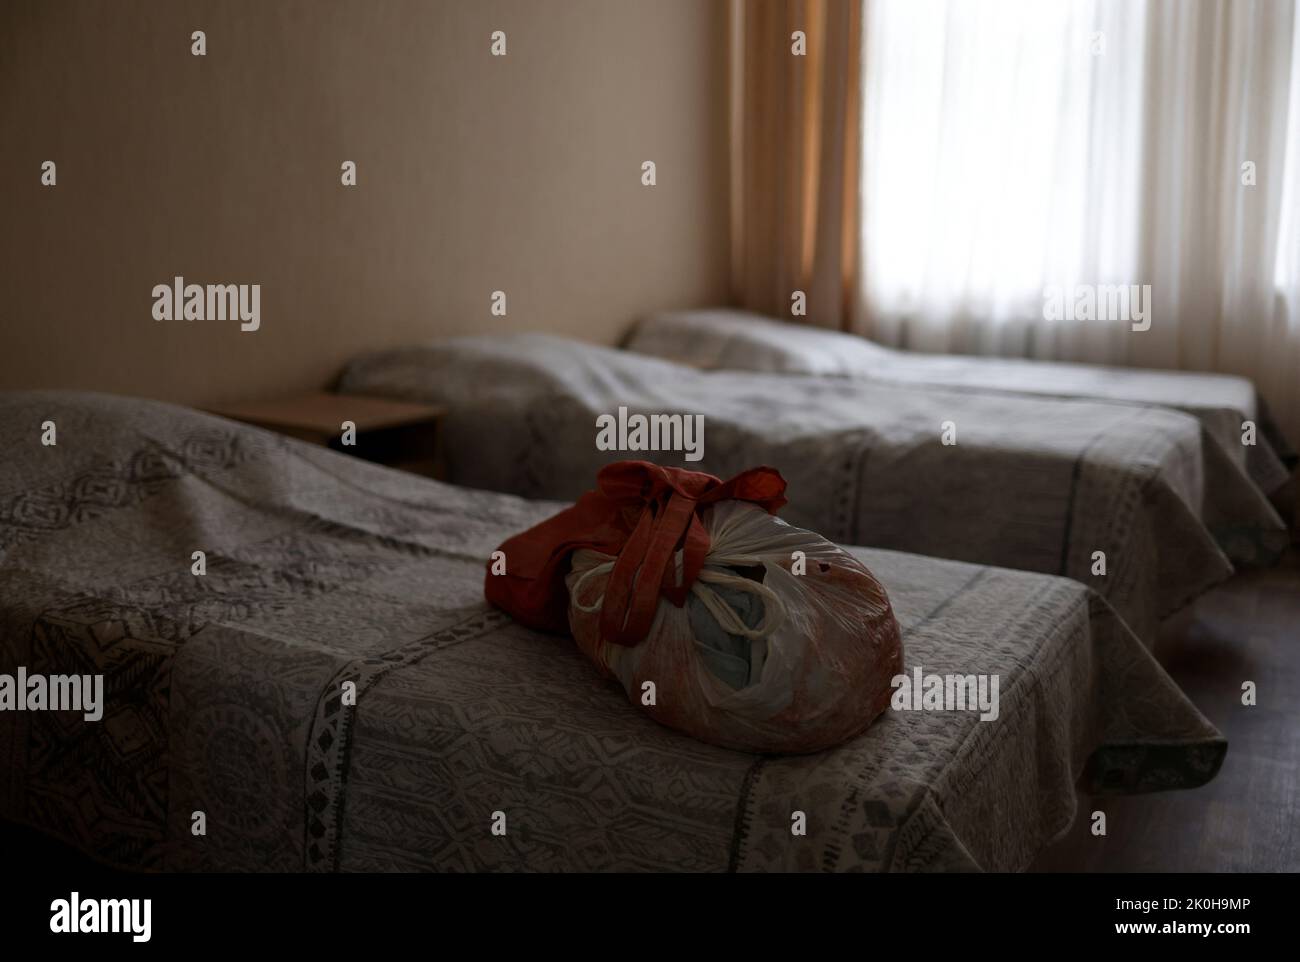 A resident's belongings are seen in a bedroom at a facility for people with special needs, amid Russia's invasion of Ukraine, in Odesa, Ukraine, June 6, 2022. Poverty is the main reason children are sent into institutions – 80 percent of families fall below the poverty line after the birth of their second child, according to a 2021 study on child protection systems by Ukraine's former Commissioner for Children’s Rights, Mykola Kuleba.     REUTERS/Edgar Su Stock Photo